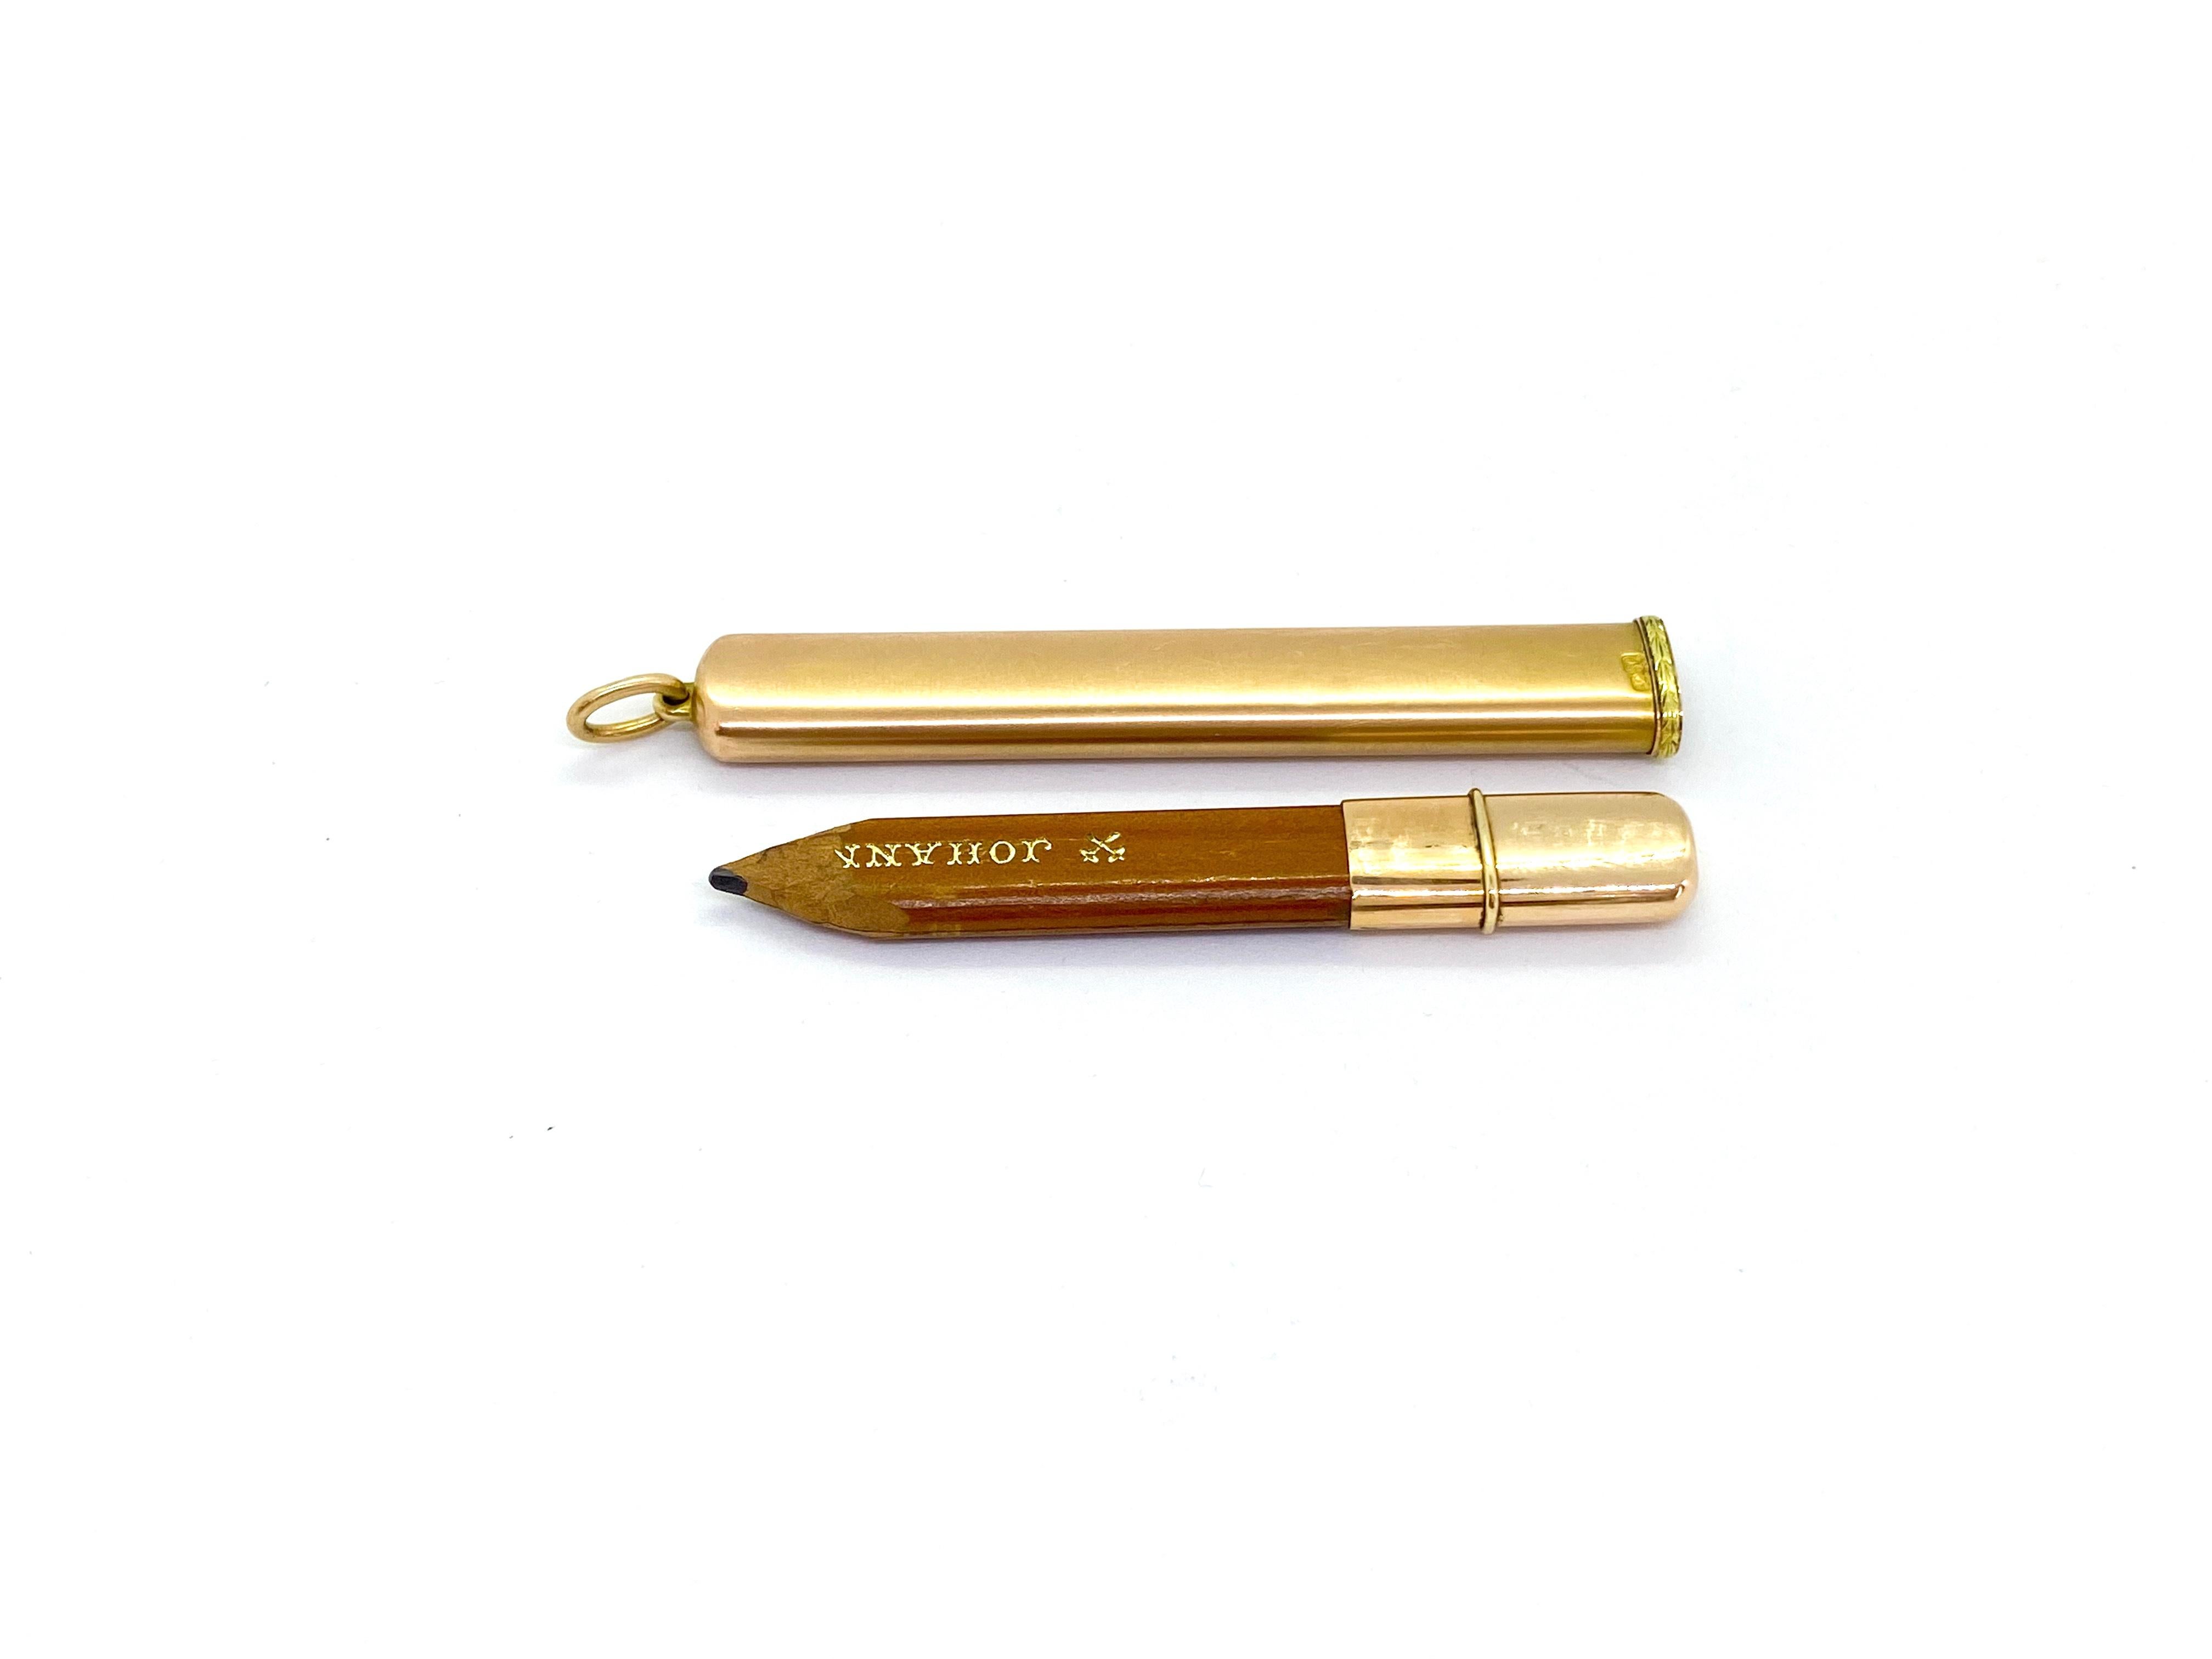 Pencil Holder Pendant
14 Karat Yellow Gold Russia Pencil Case Pendant.
14 Carat Yellow and Green Gold Russia Saint Petersburg 
Marked with 56 zolotnik old Russian gold standard 
Author's stamp unclear, see picture.
Faberge made similar pens, but I